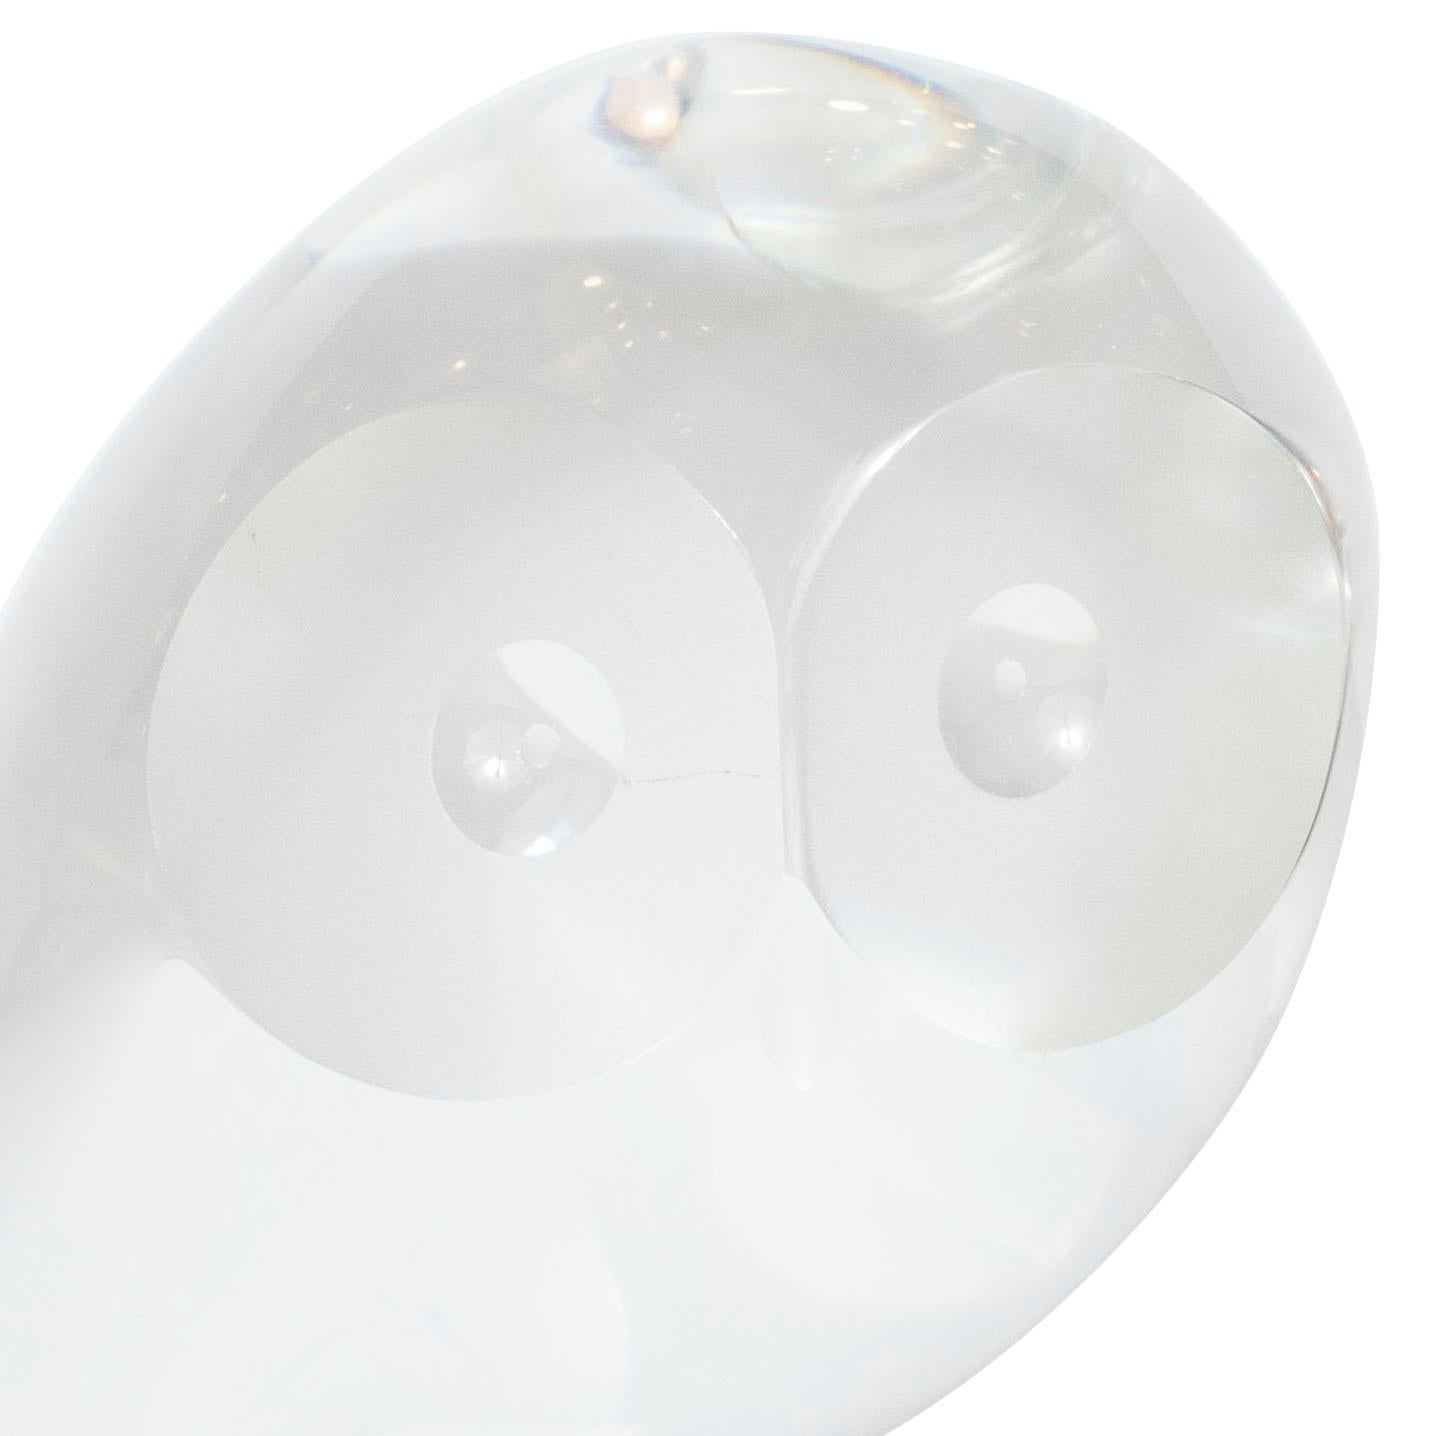 This elegant glass paperweight/decorative object was created by Steuben Glass Works- one of America's premiere glass studios, since its founding in 1903-circa 1960. It offers a highly stylized rendition of a perched owl. Its eyes are depicted as